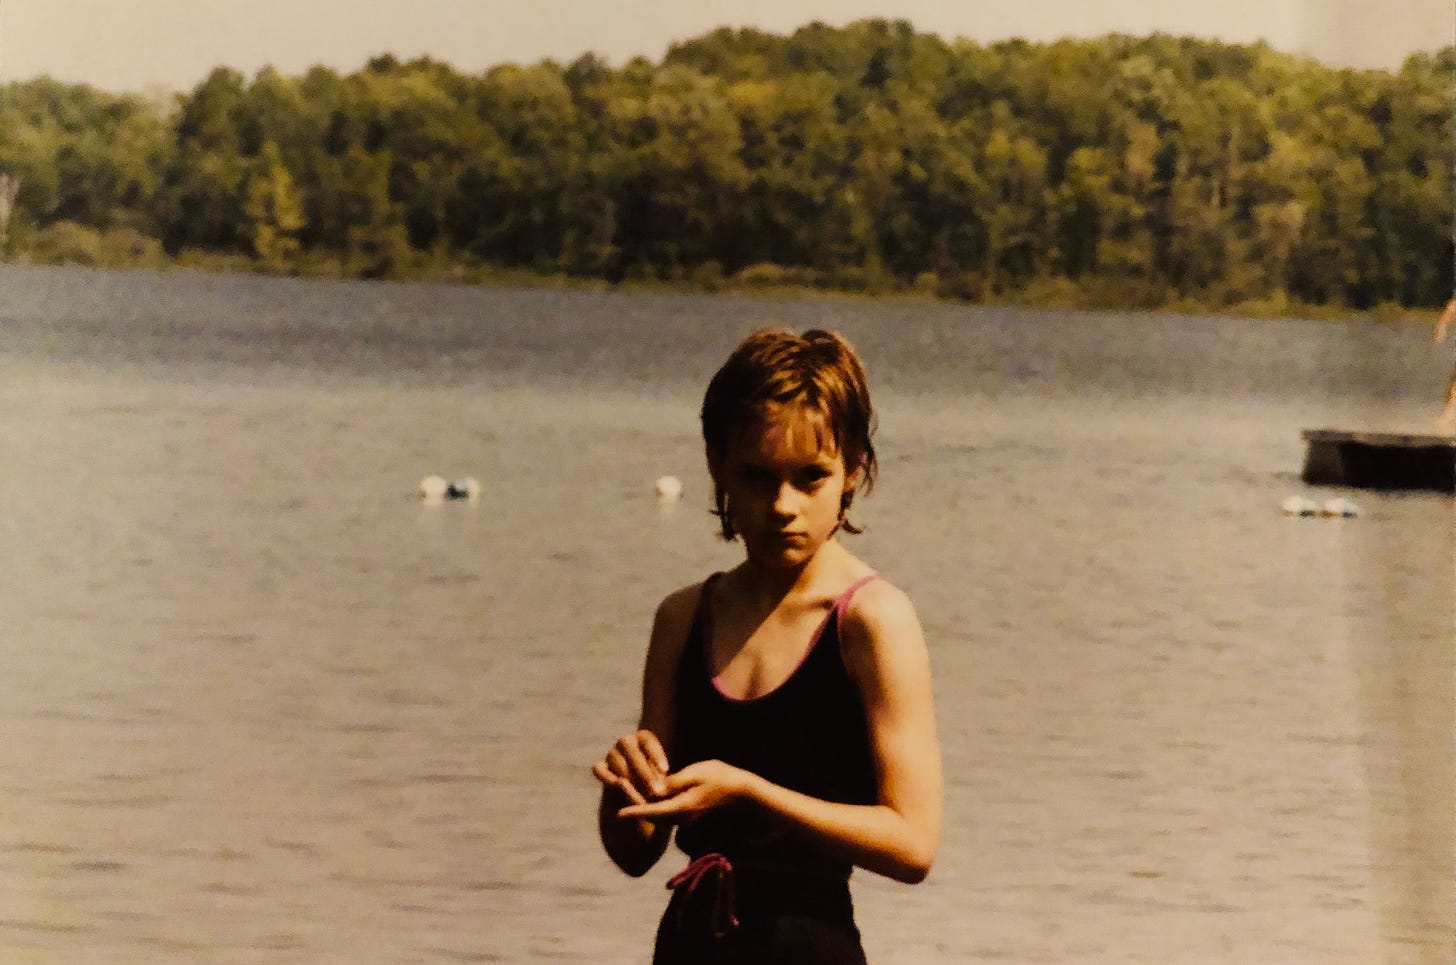 A grouchy twelve-year-old girl in a black swimsuit glares at you from the shore of a lake with swimming buoys and trees in the background